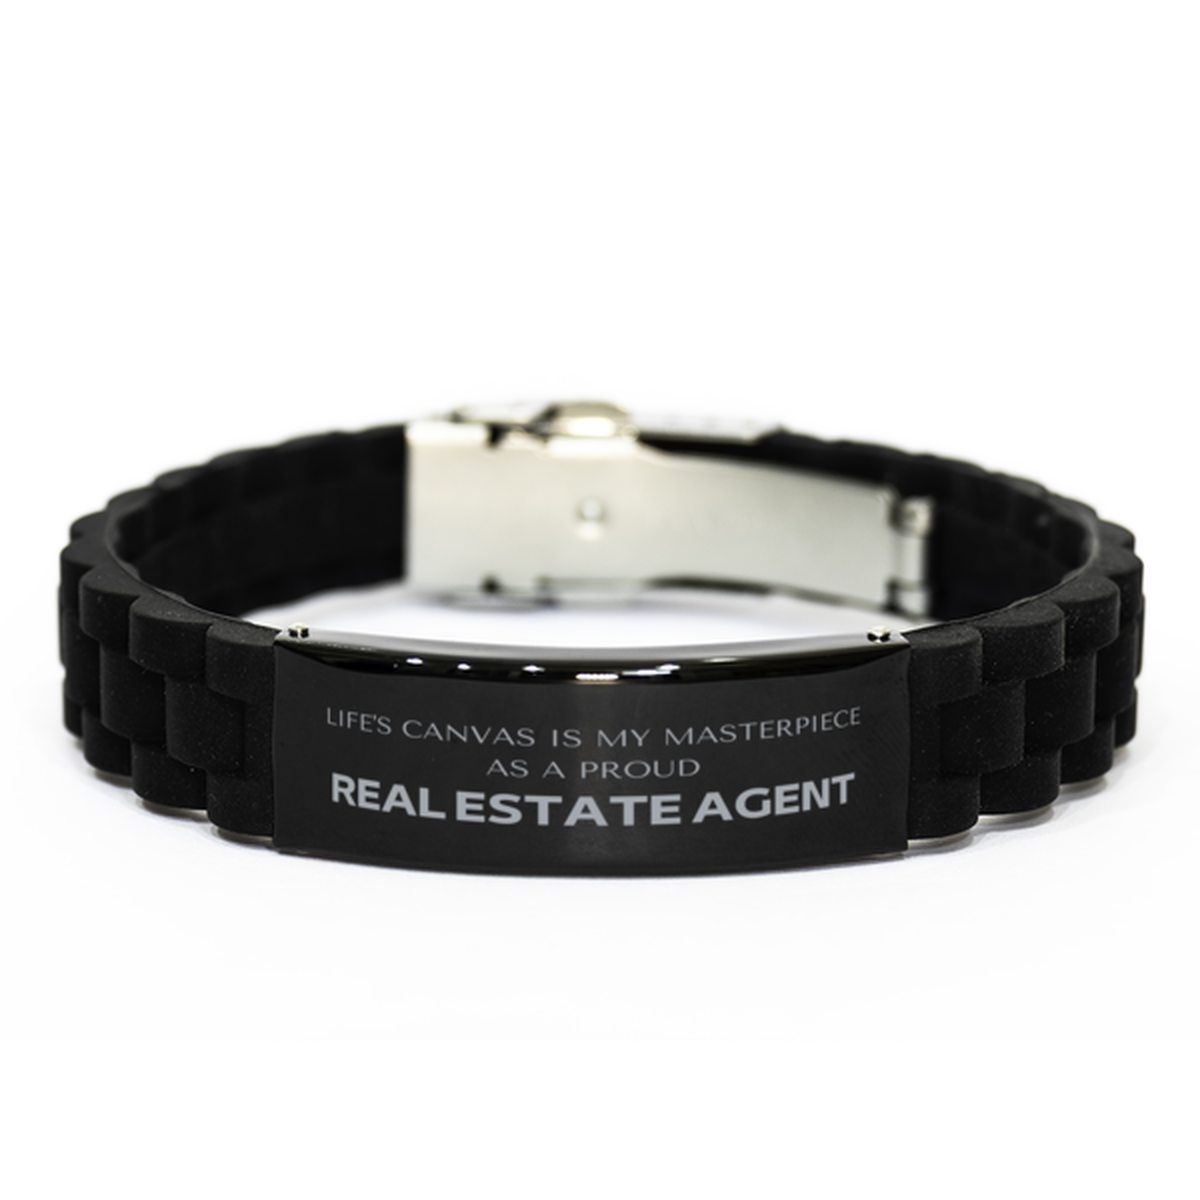 Proud Real Estate Agent Gifts, Life's canvas is my masterpiece, Epic Birthday Christmas Unique Black Glidelock Clasp Bracelet For Real Estate Agent, Coworkers, Men, Women, Friends